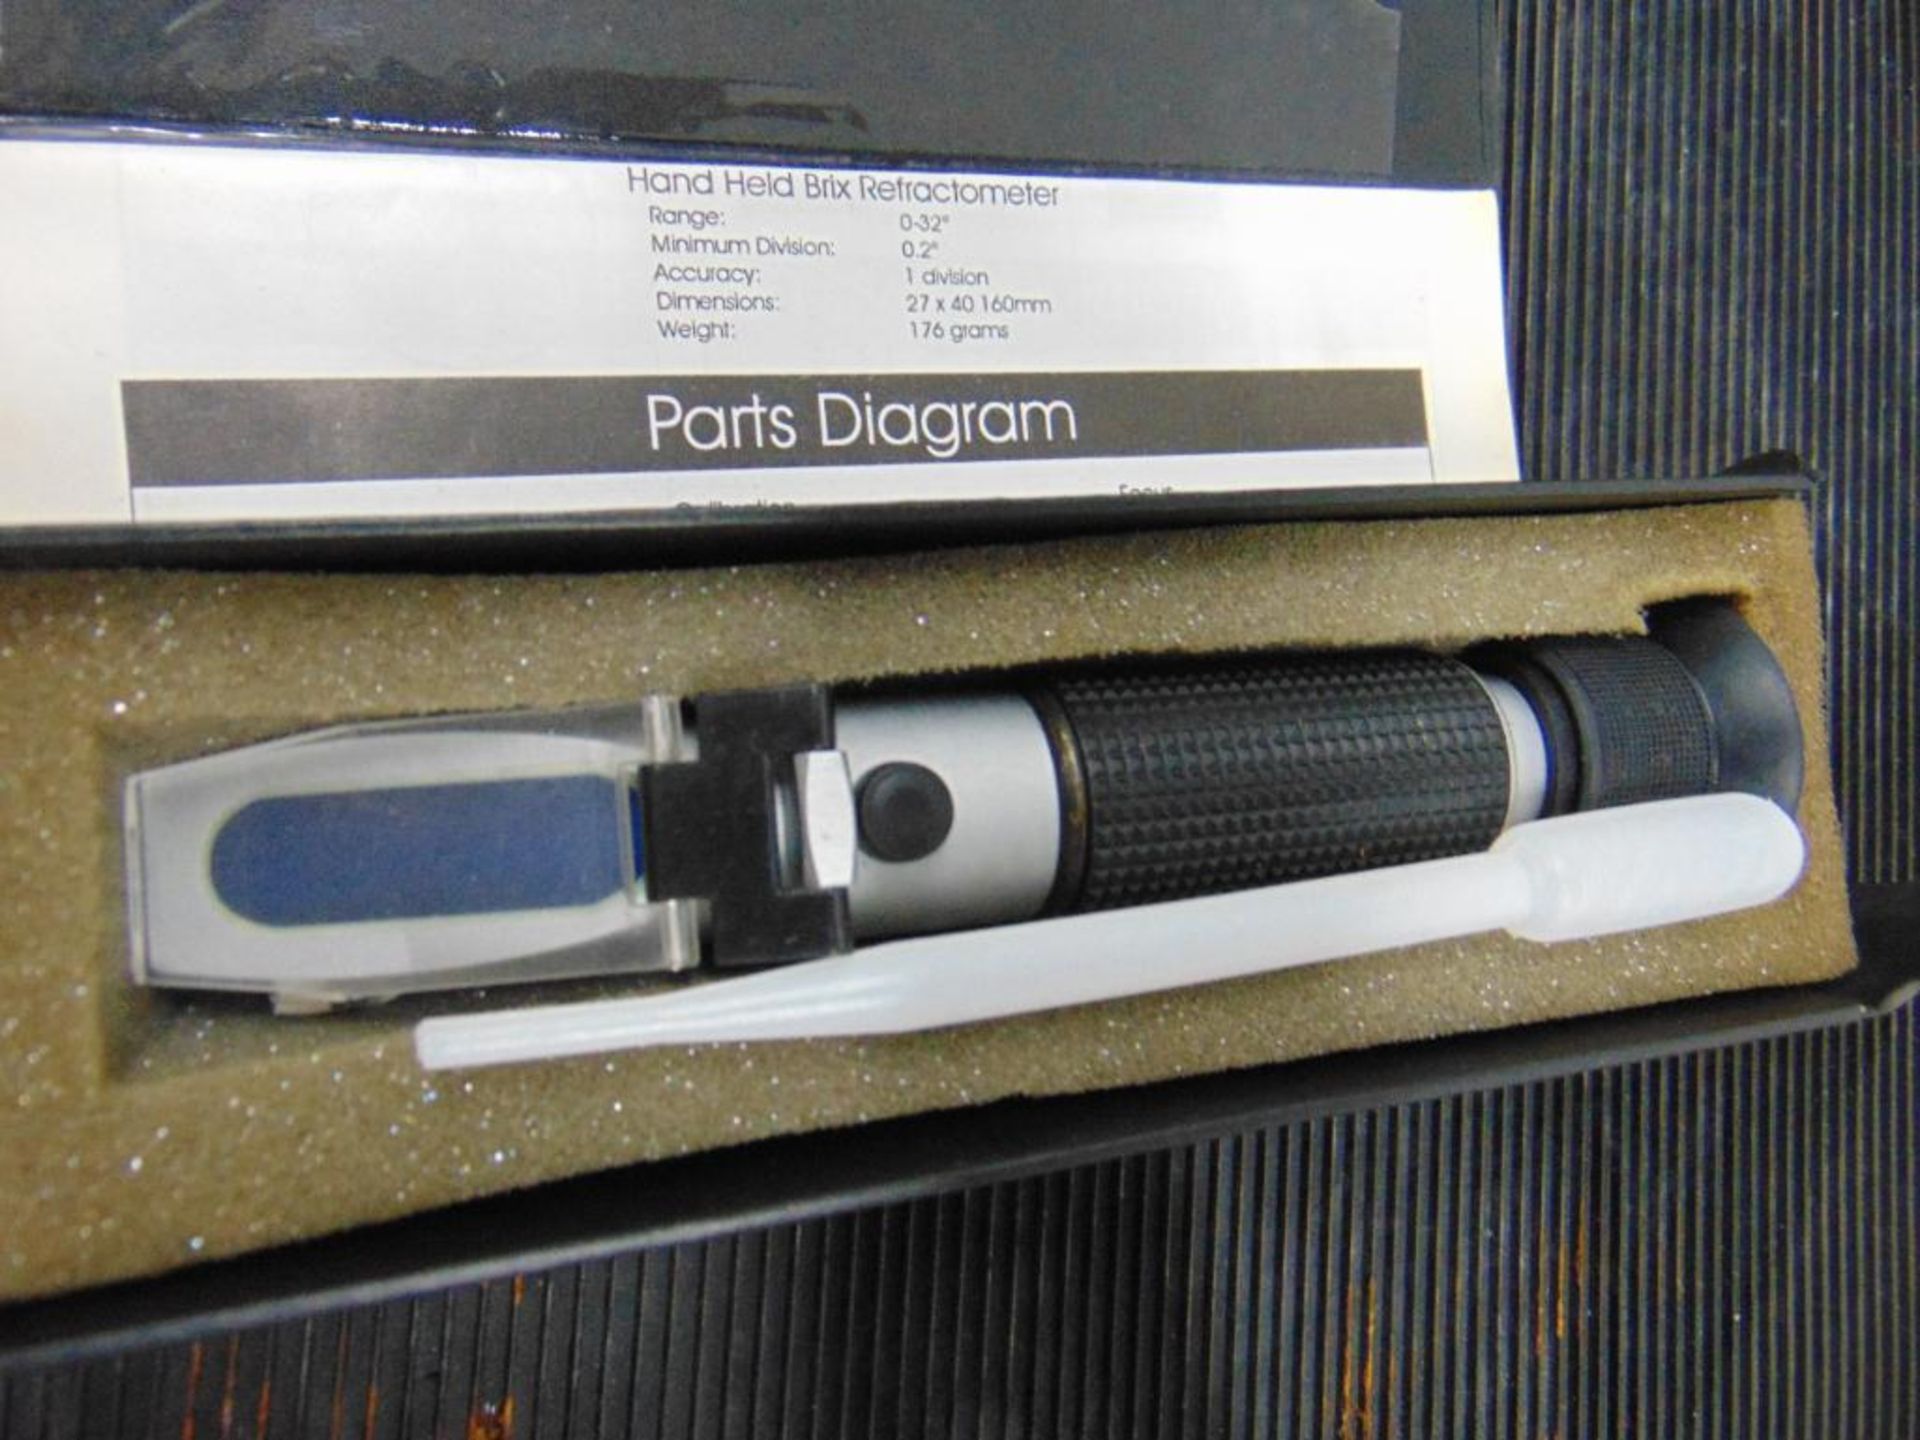 Portable Brix Refractometer - Image 2 of 3